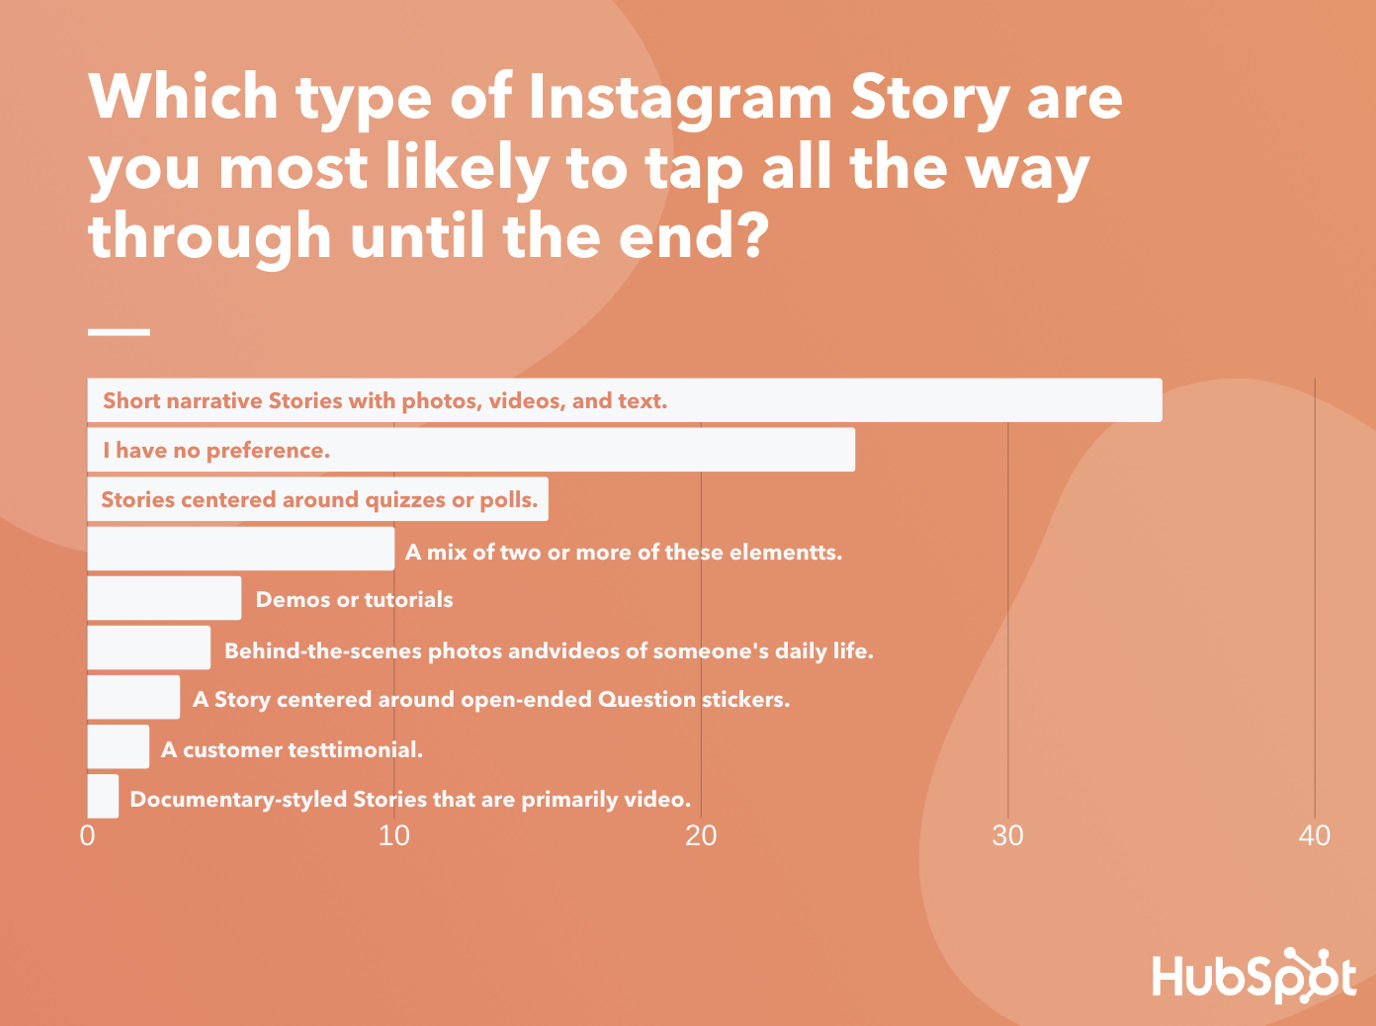 chart showing how audiences prefer different Instagram Story types